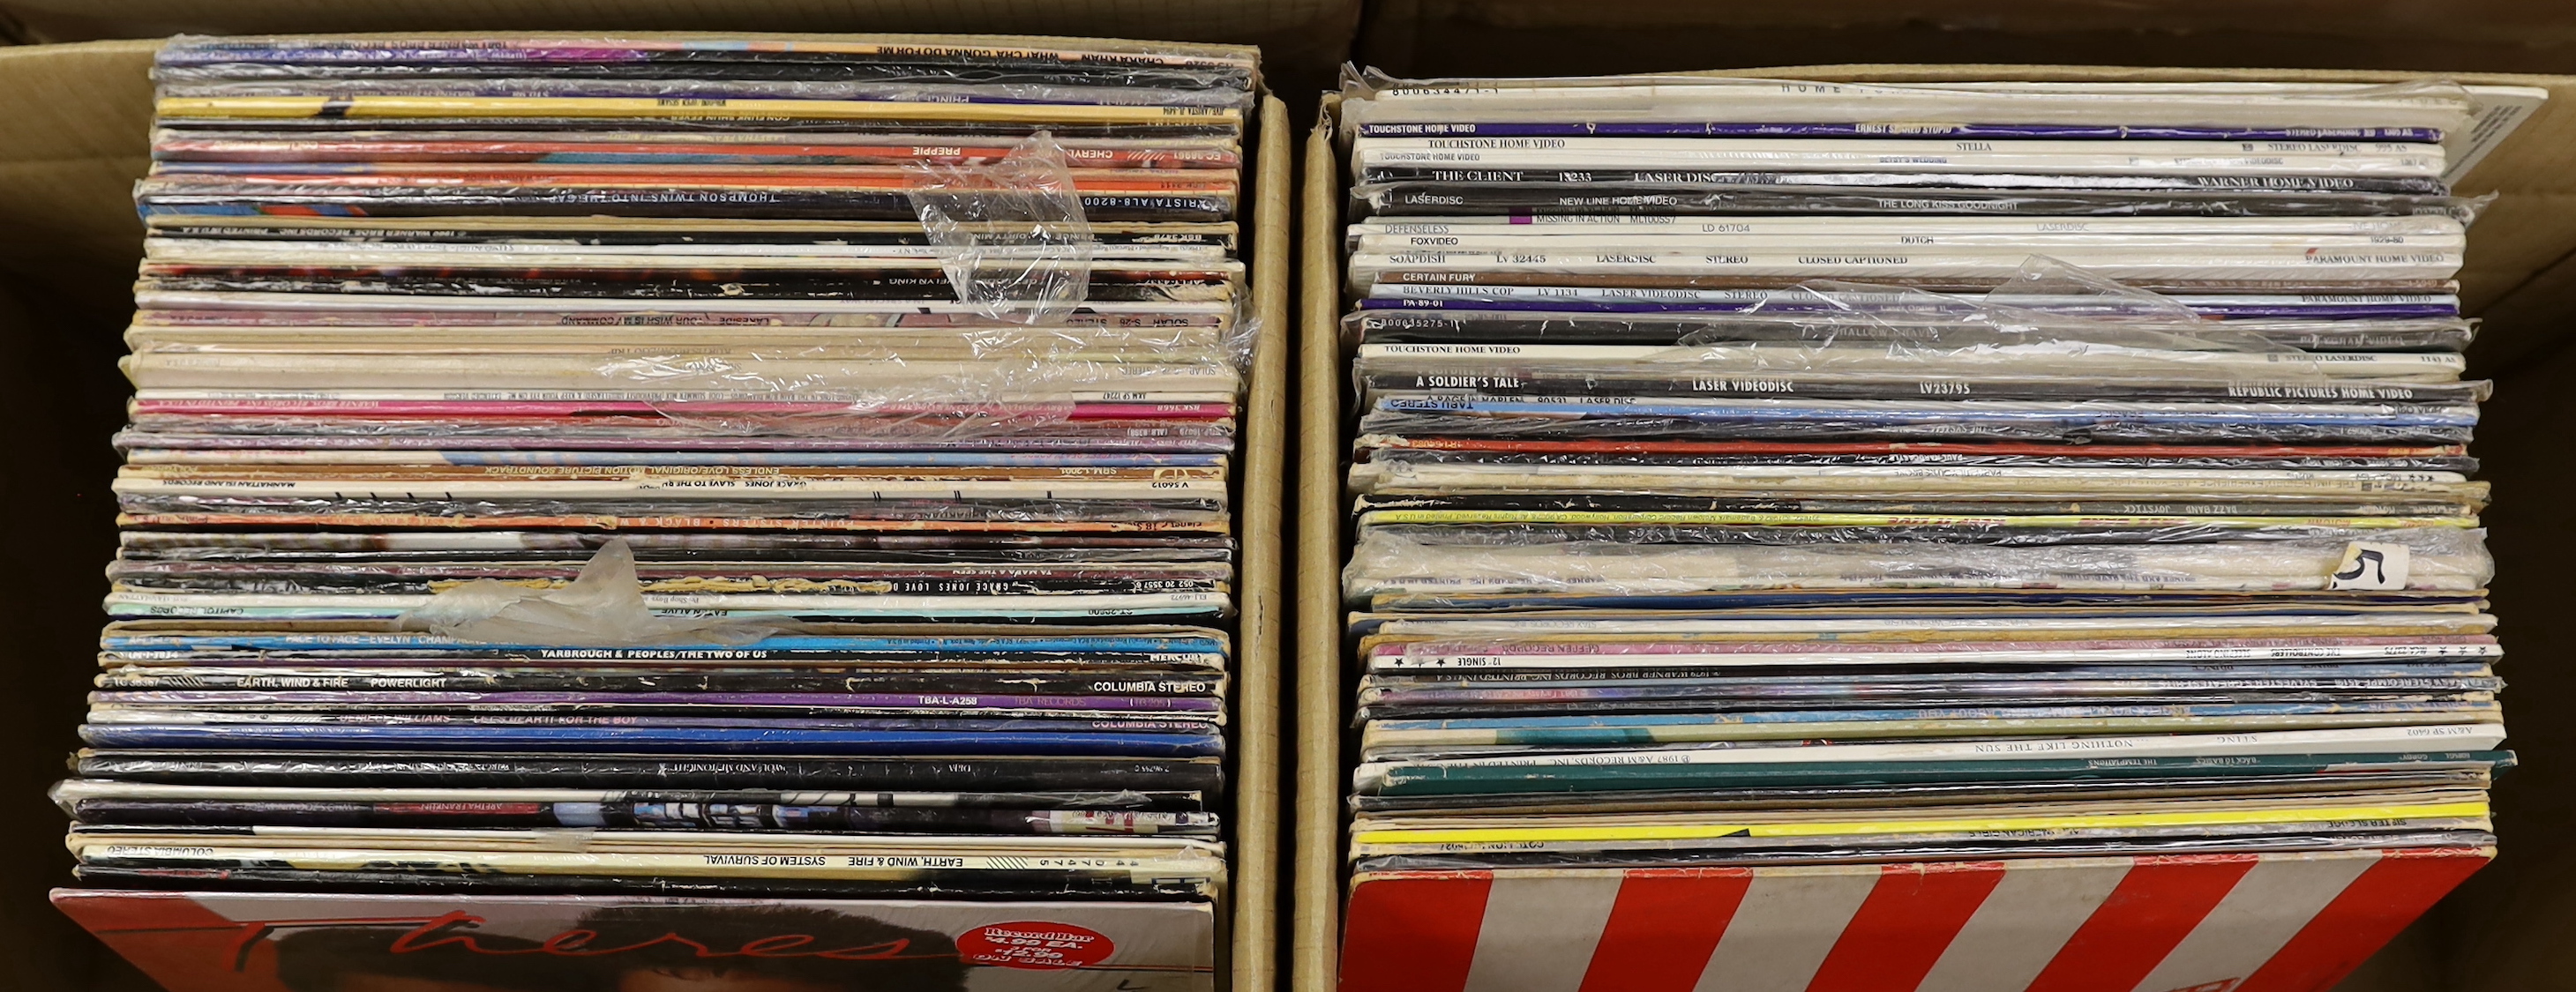 Ninety mostly 1970's/80's LPs etc., including Earth, Wind & Fire, Michael Jackson, Diana Ross, Pet Shop Boys, Pointer Sisters, Grace Jones, Dionne Warwick, Stevie Wonder, Sister Sledge, Sting, etc. Together with a number